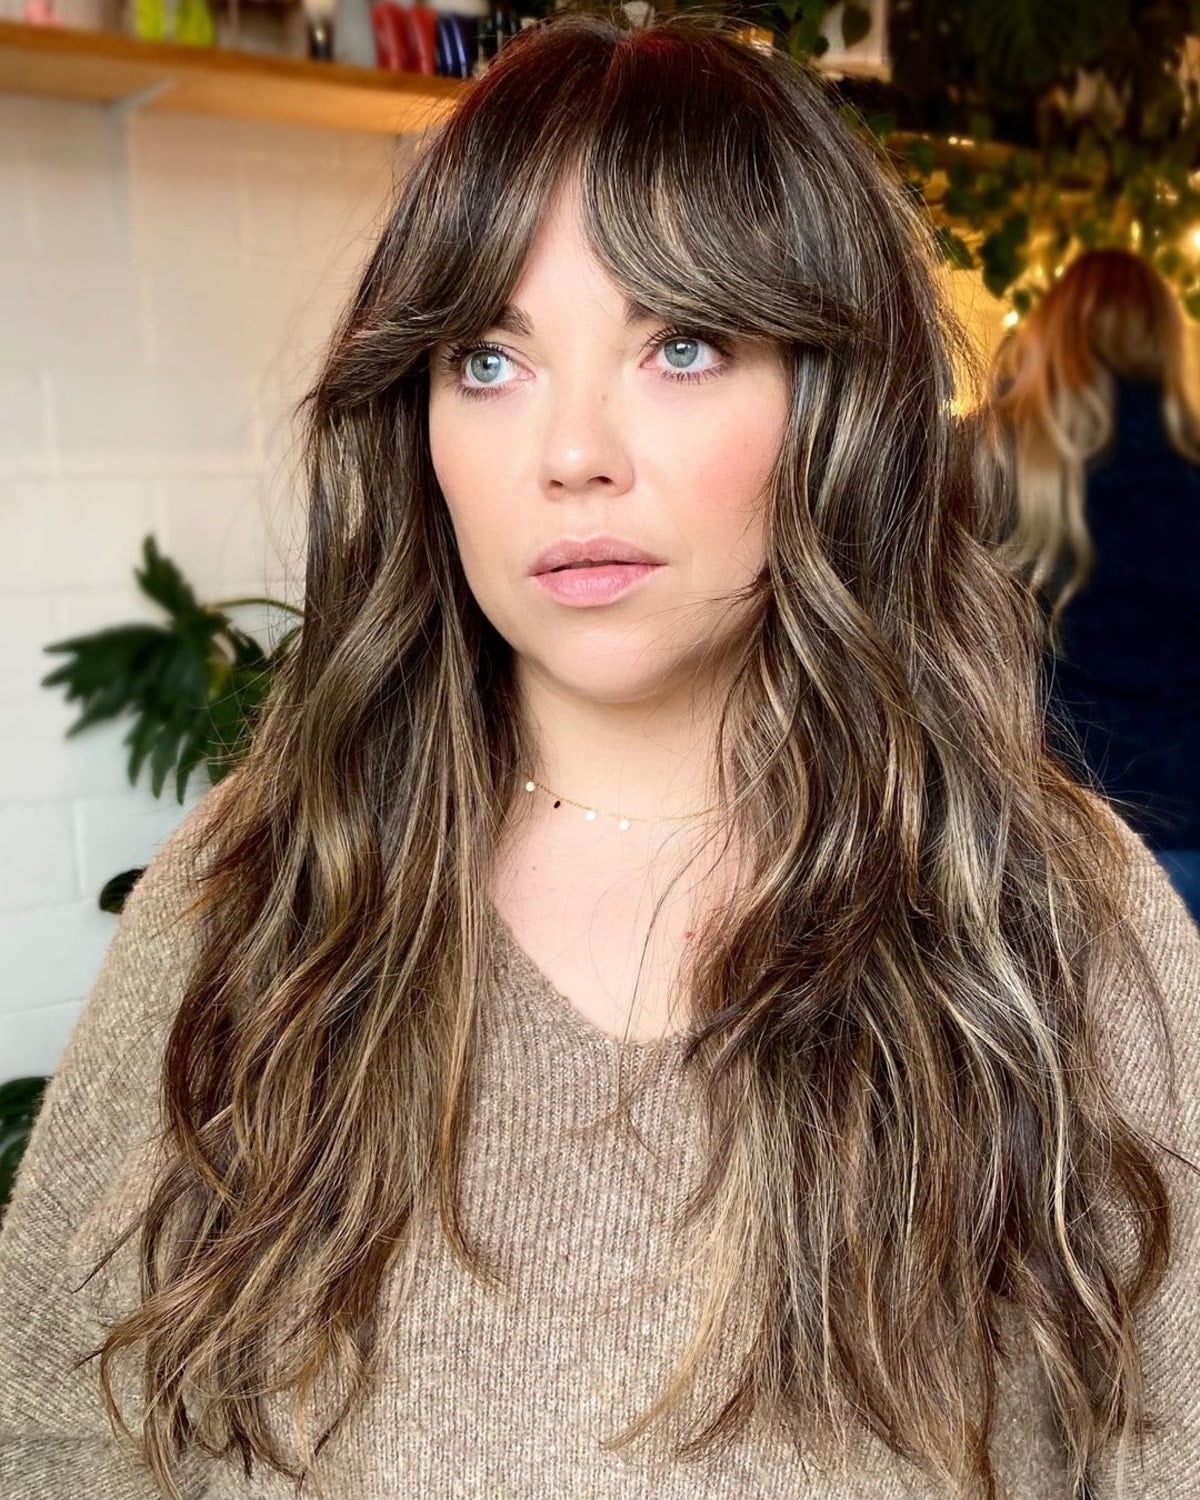 21 Trendiest Ways to Wear Long Curtain Bangs, According to Stylists